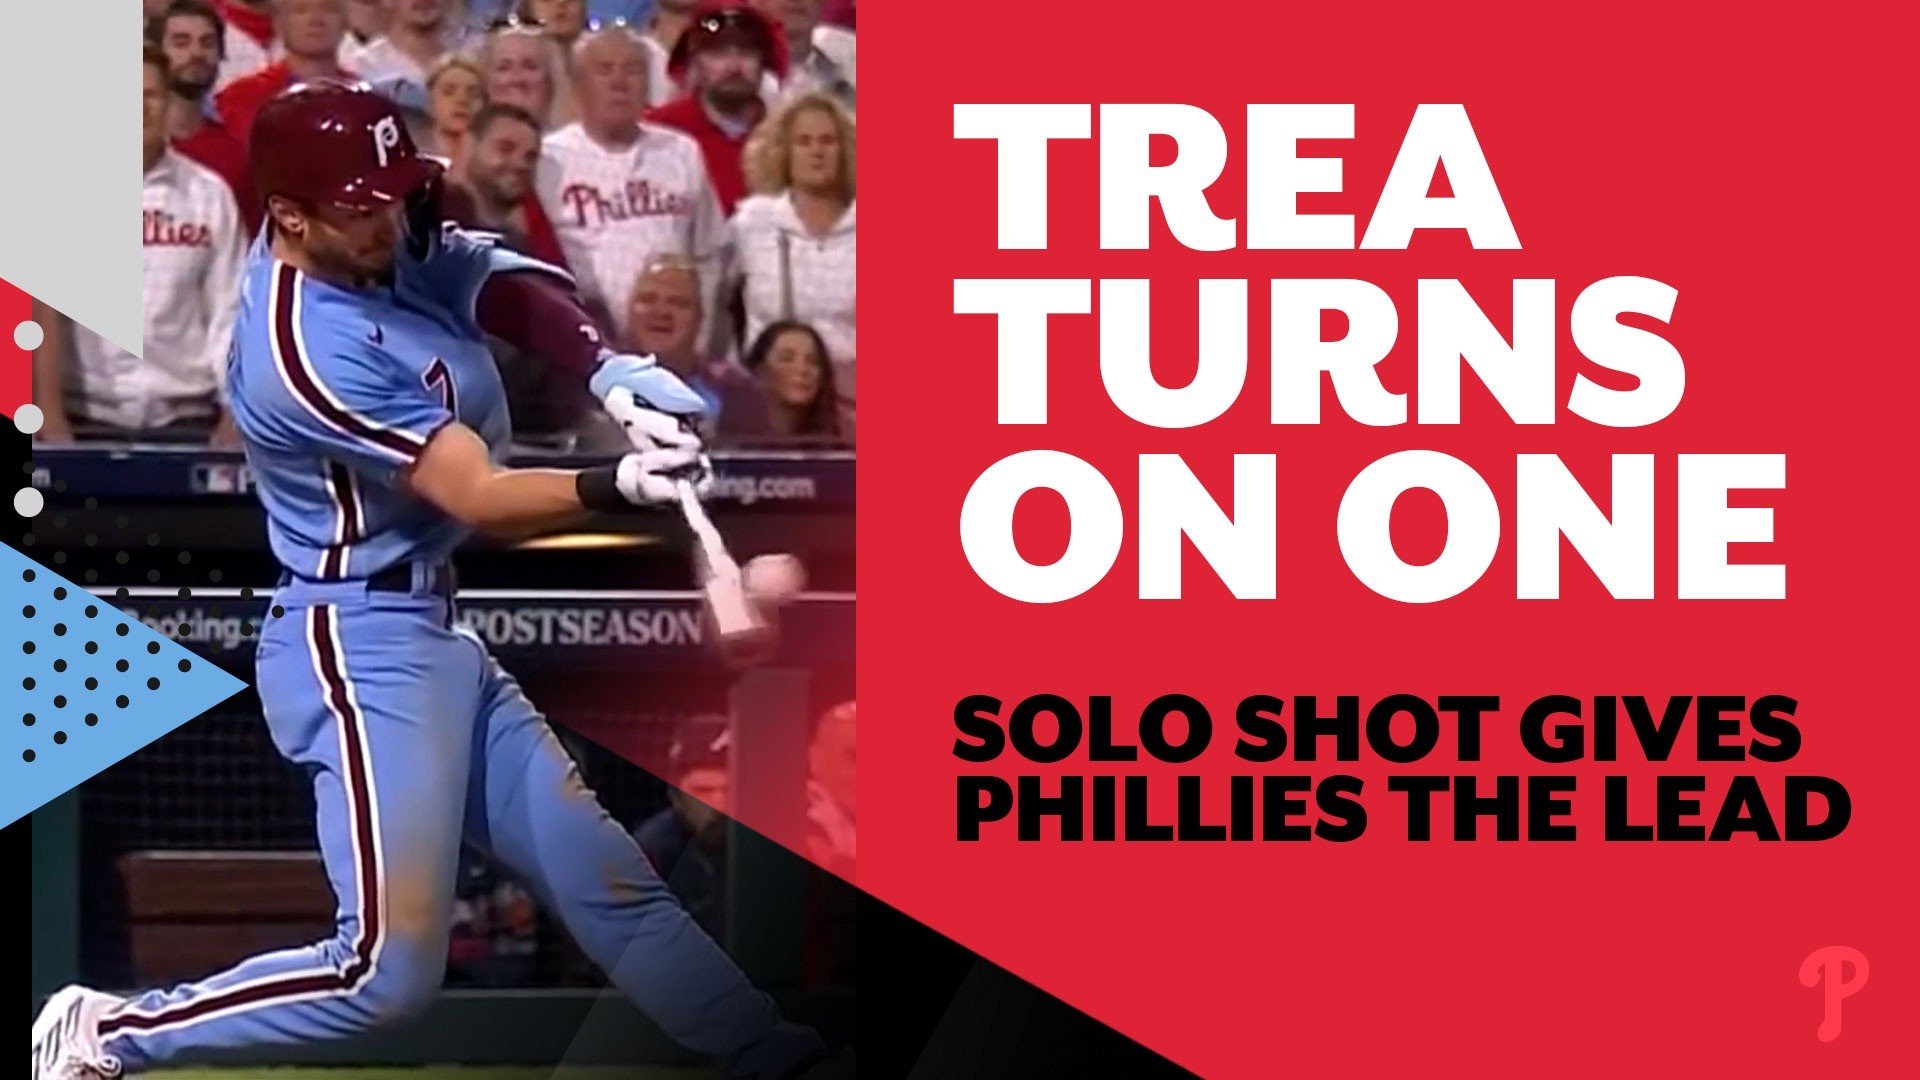 All About Trea Turner, the Philadelphia Phillies Star Dominating